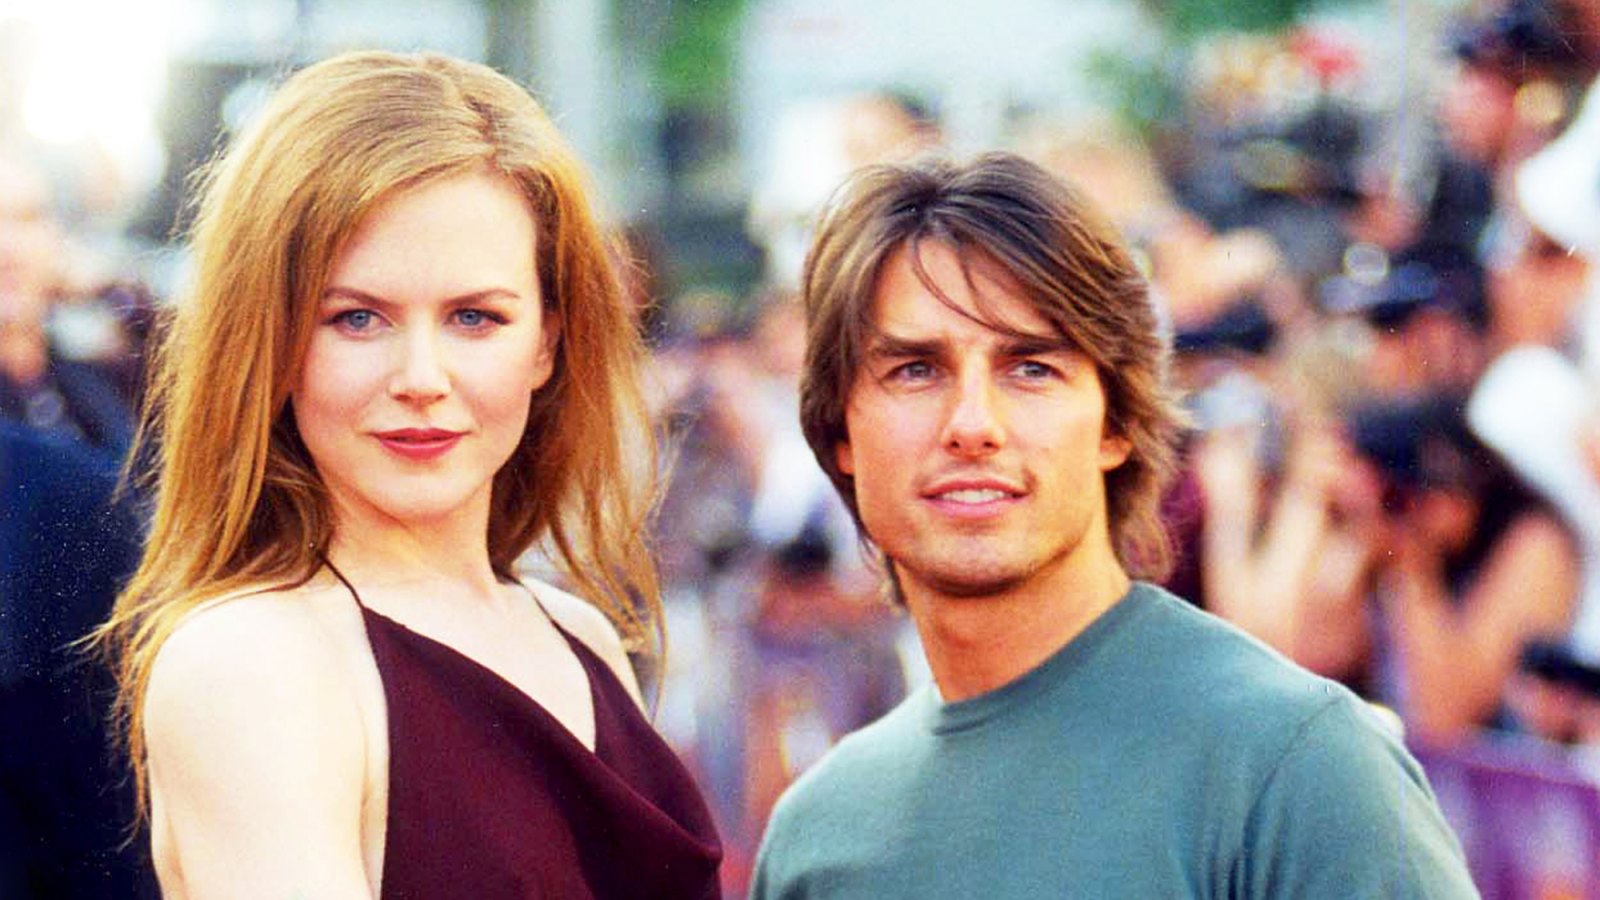 Nicole Kidman and Tom Cruise attend the 1999 ’Eyes Wide Shut' premiere in Westwood, California.